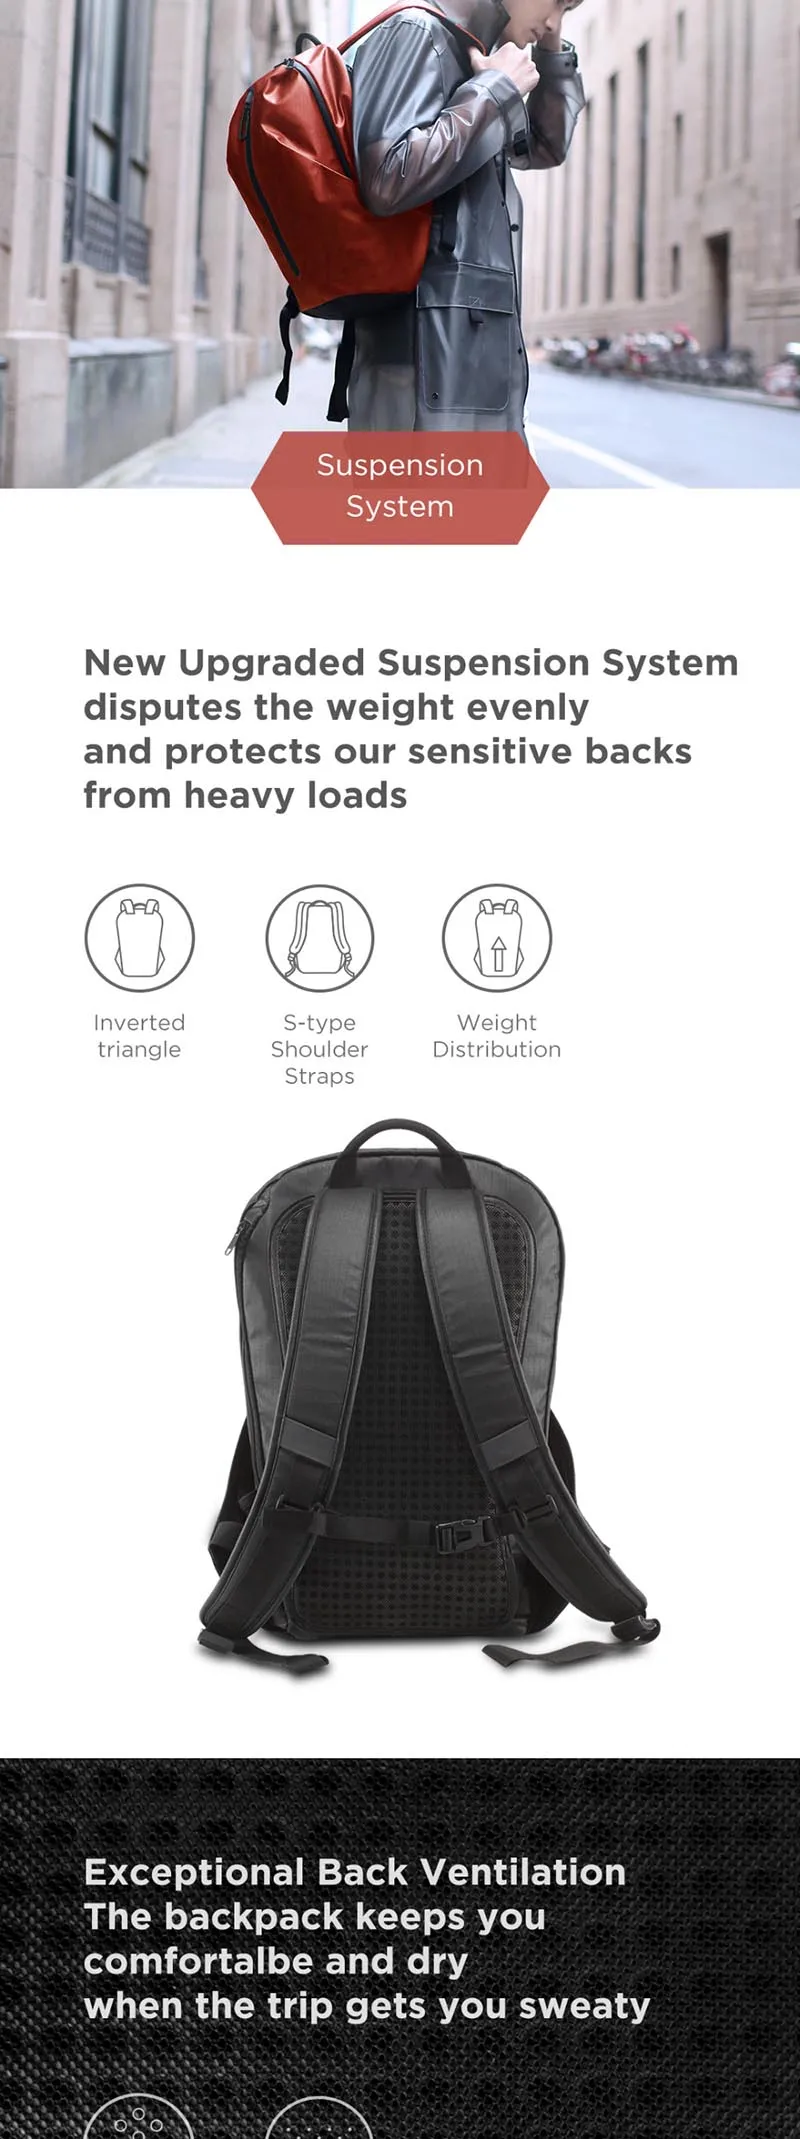 Xiaomi Eco-chain 90FUN All Weather Functional Backpack Fashion Waterproof bag Travel College School Bussiness, Black/Orange red